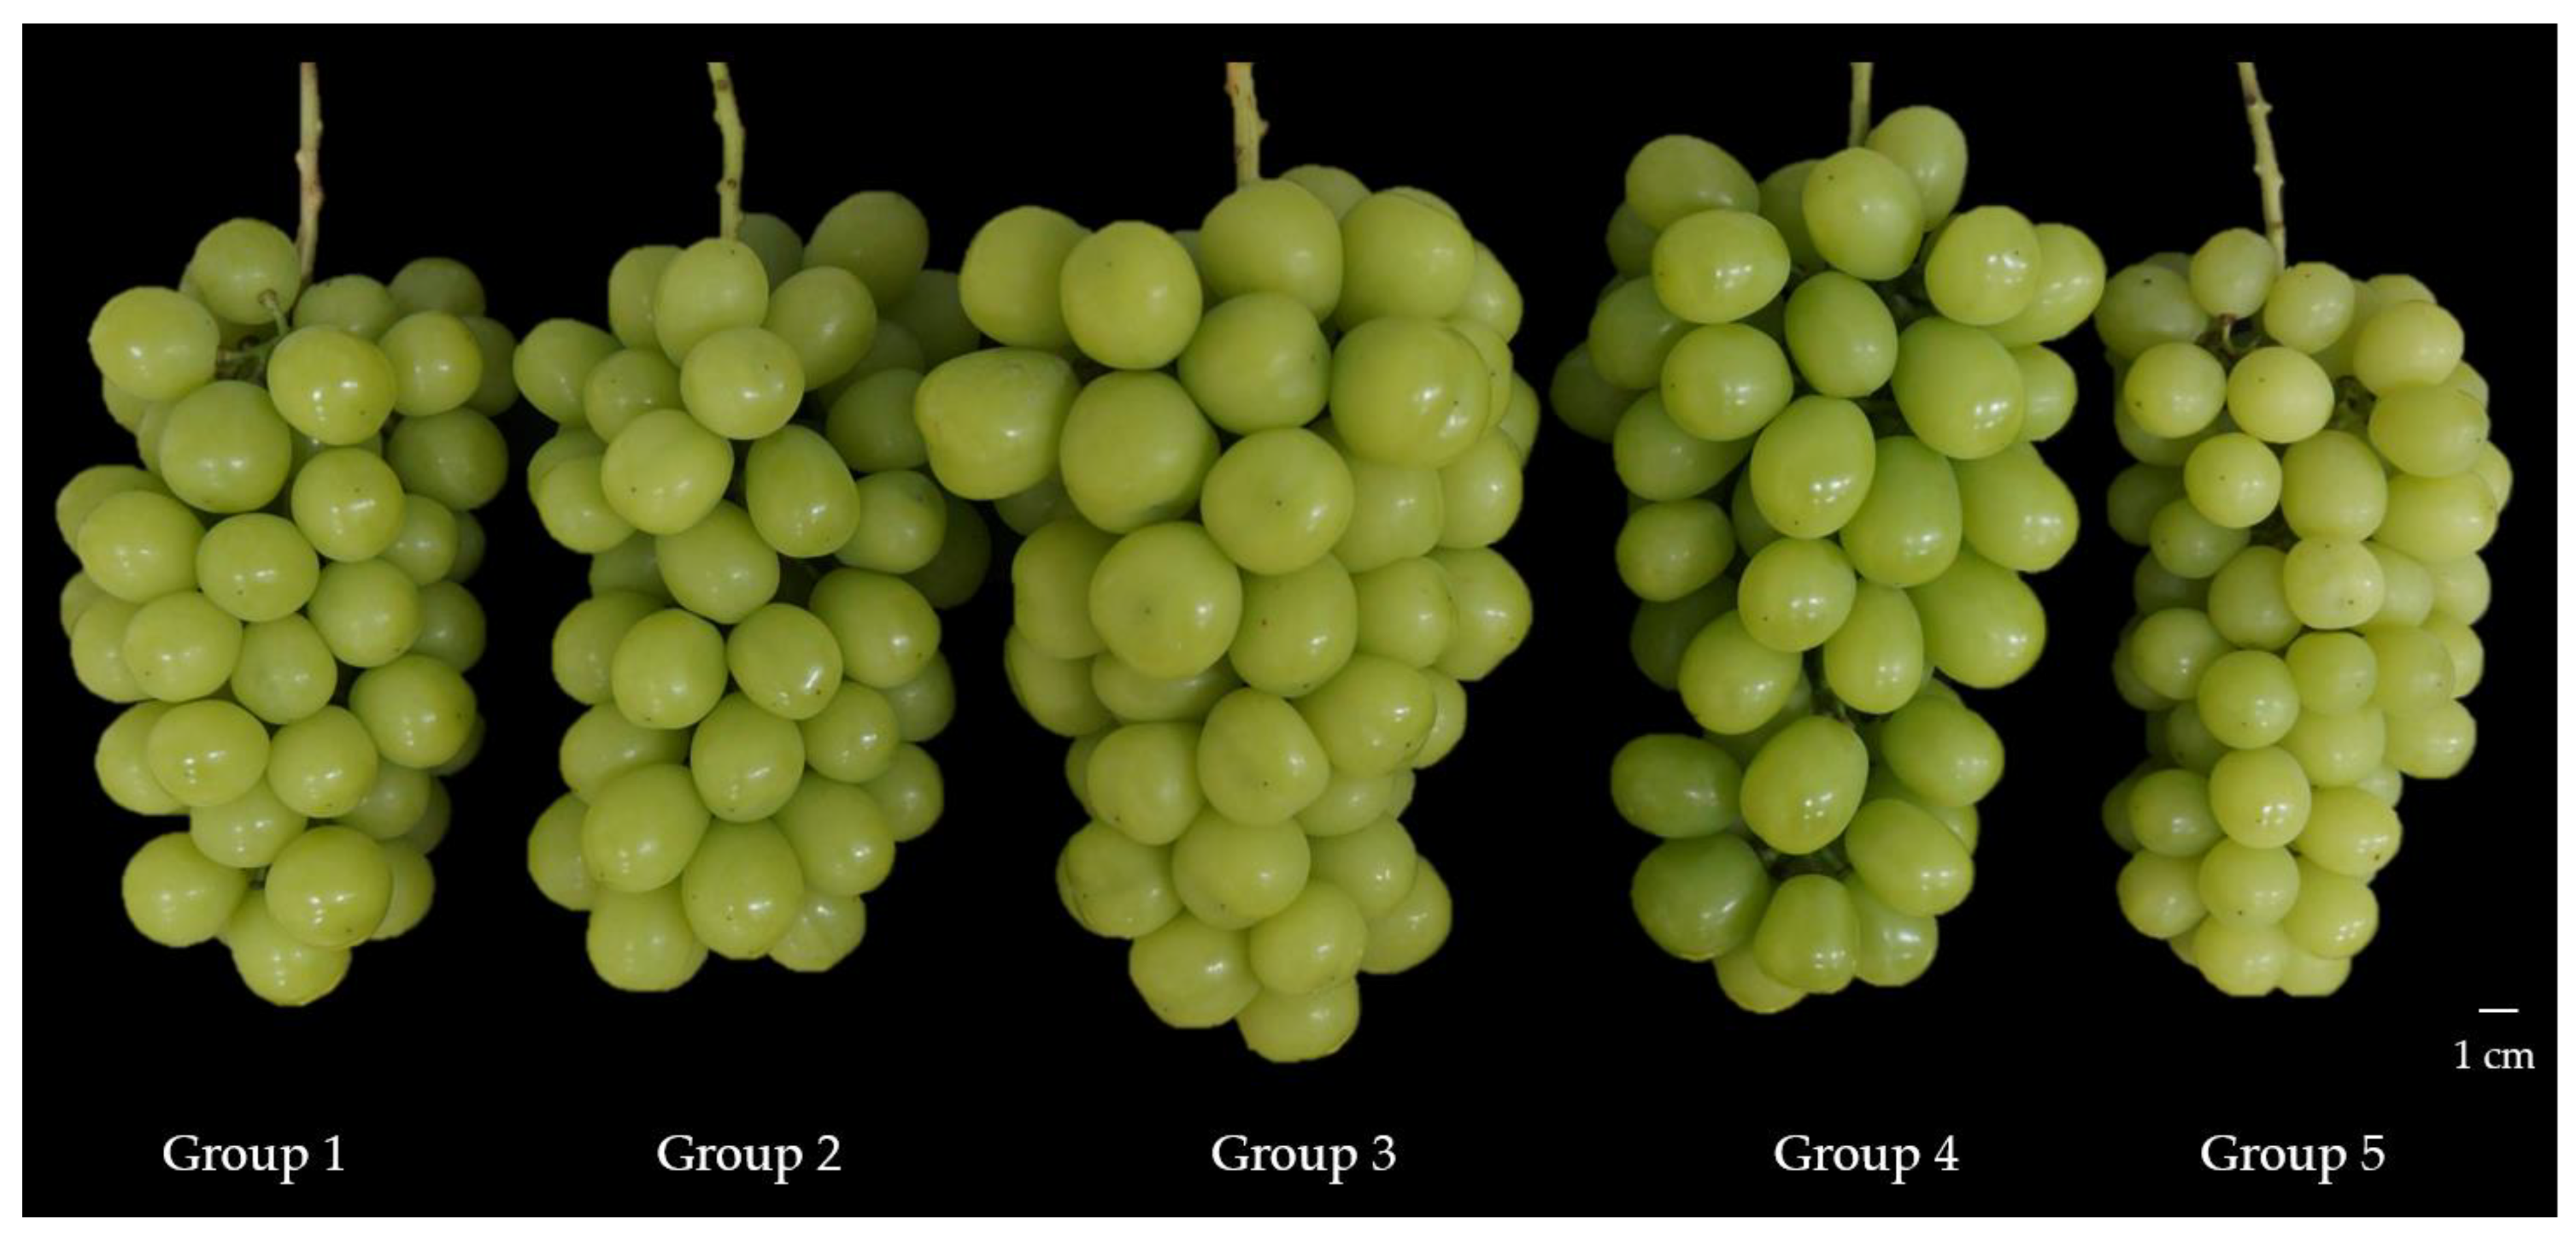 Horticulturae | Free Full-Text | The Impact of Plant Growth Regulators and  Floral Cluster Thinning on the Fruit Quality of &lsquo;Shine Muscat&rsquo;  Grape